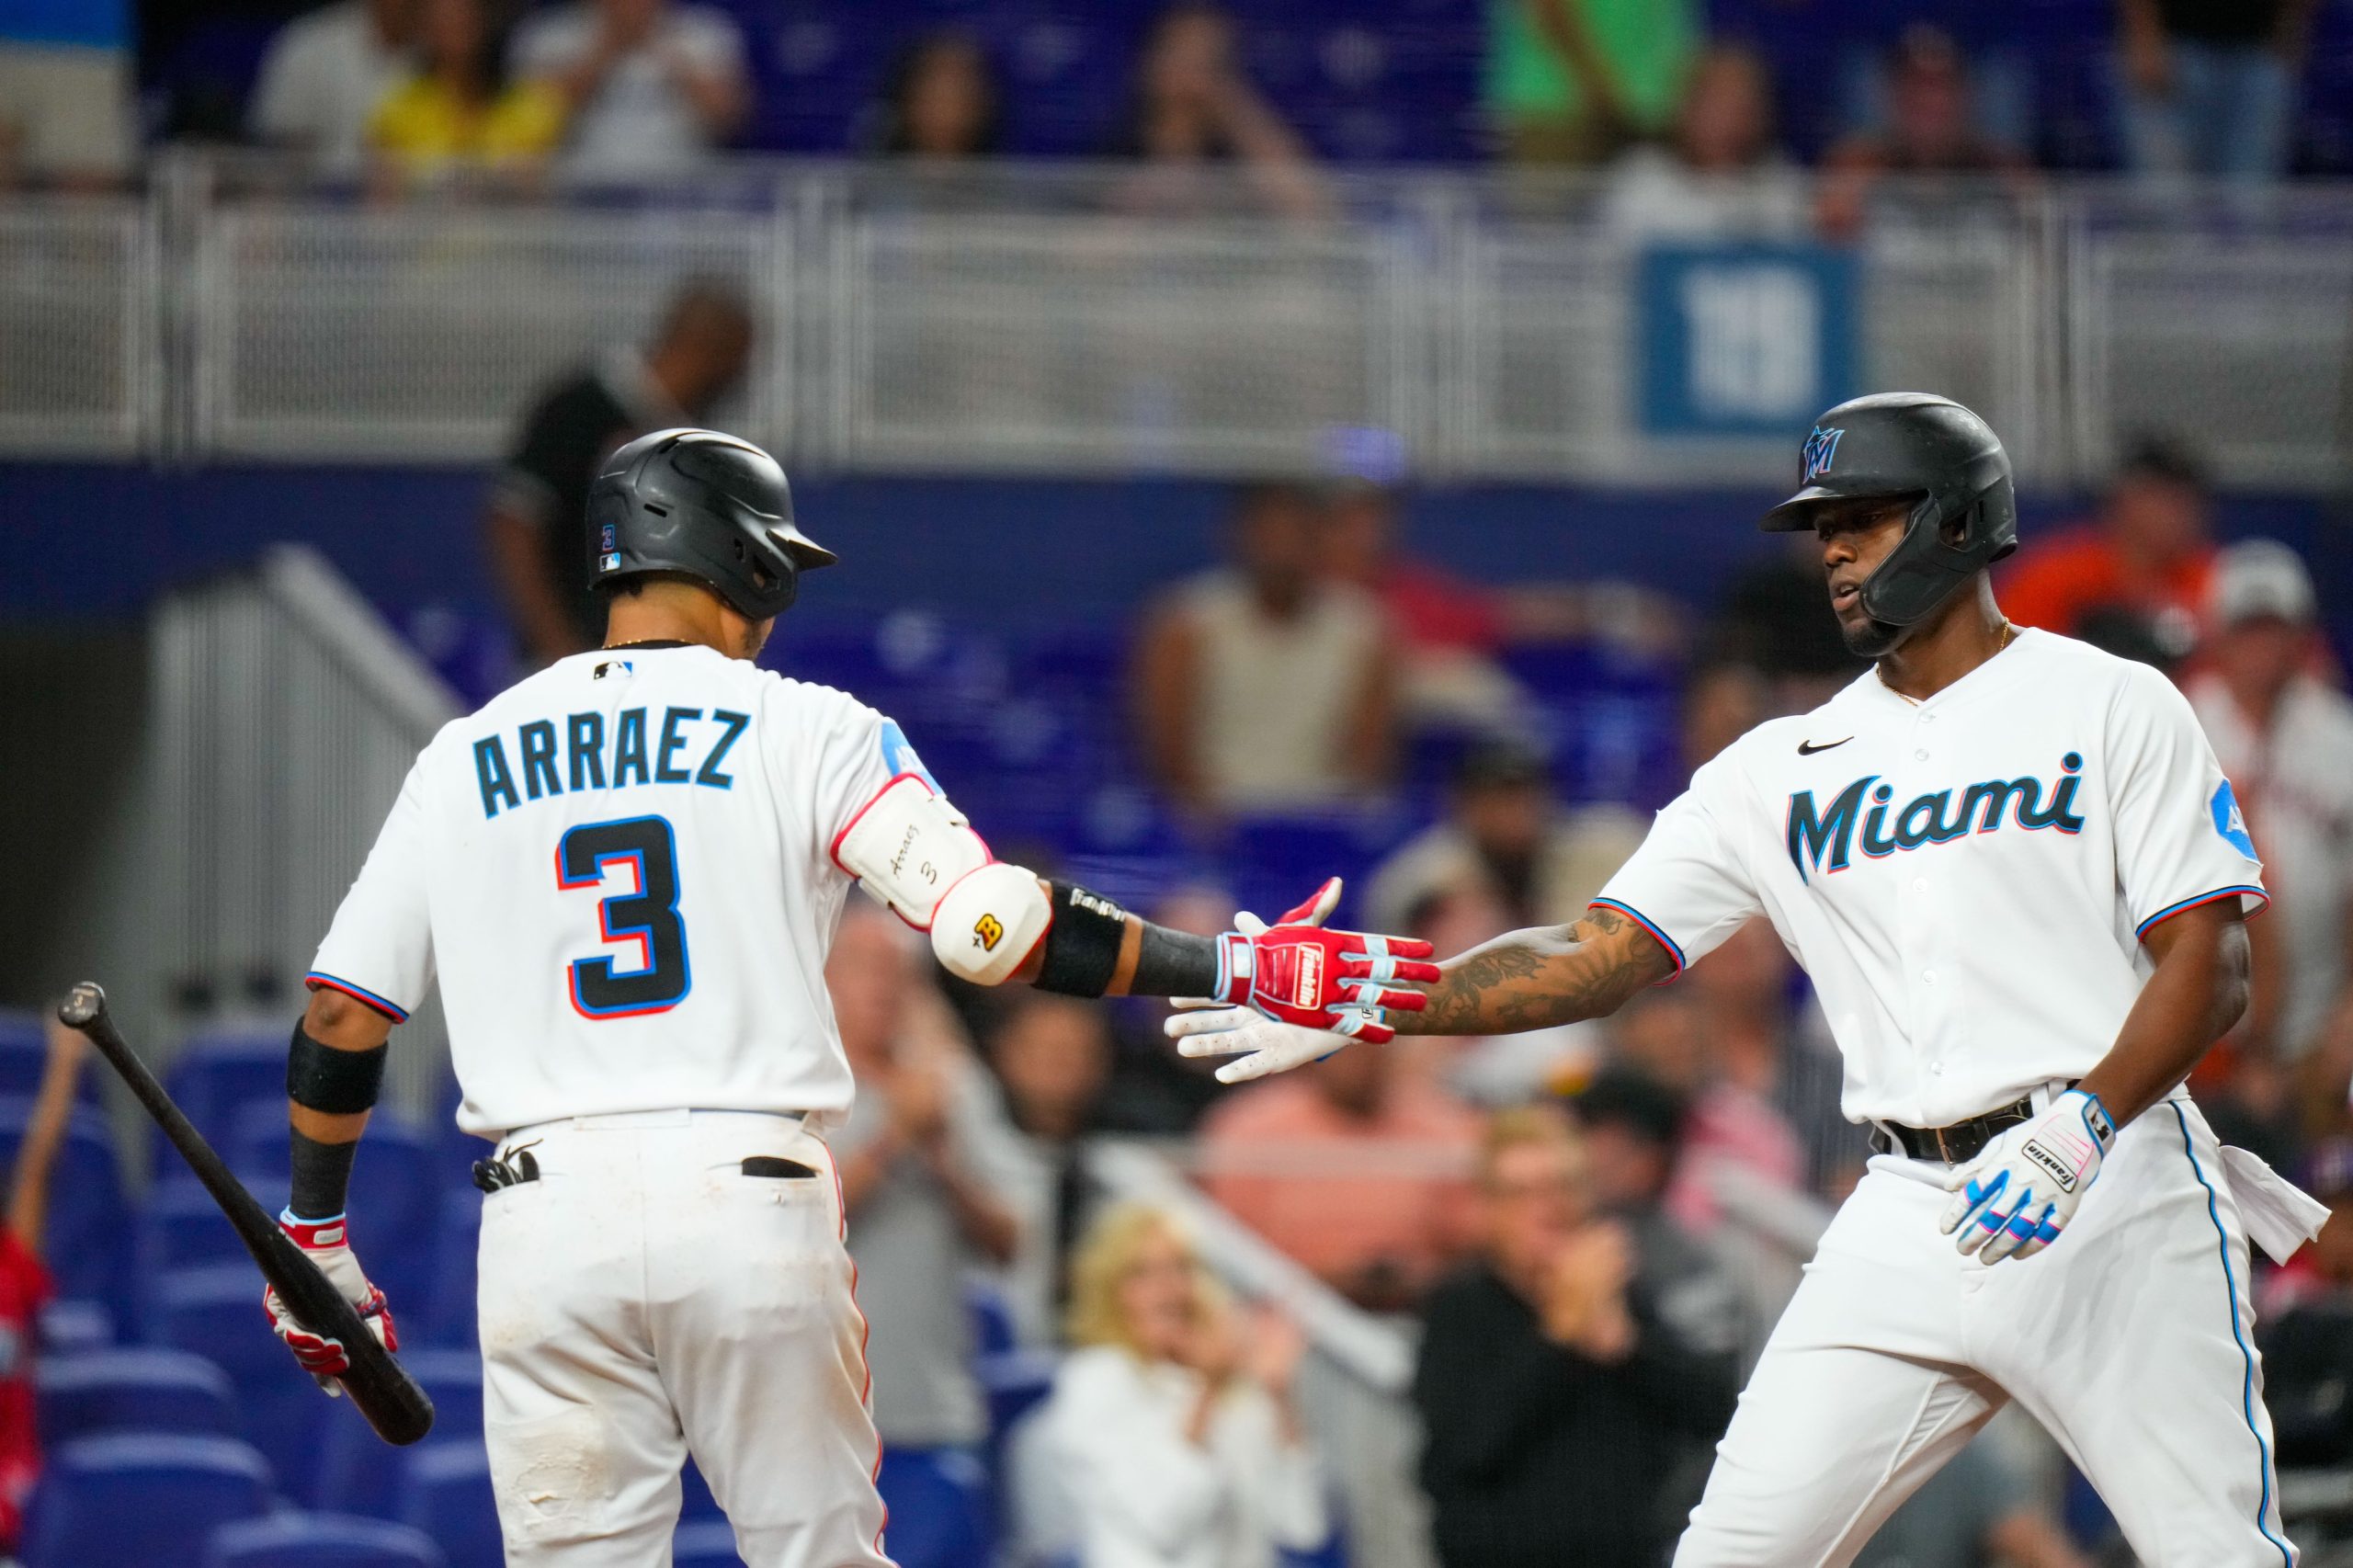 With New Stadium and Look, Marlins Bid for Attention - The New